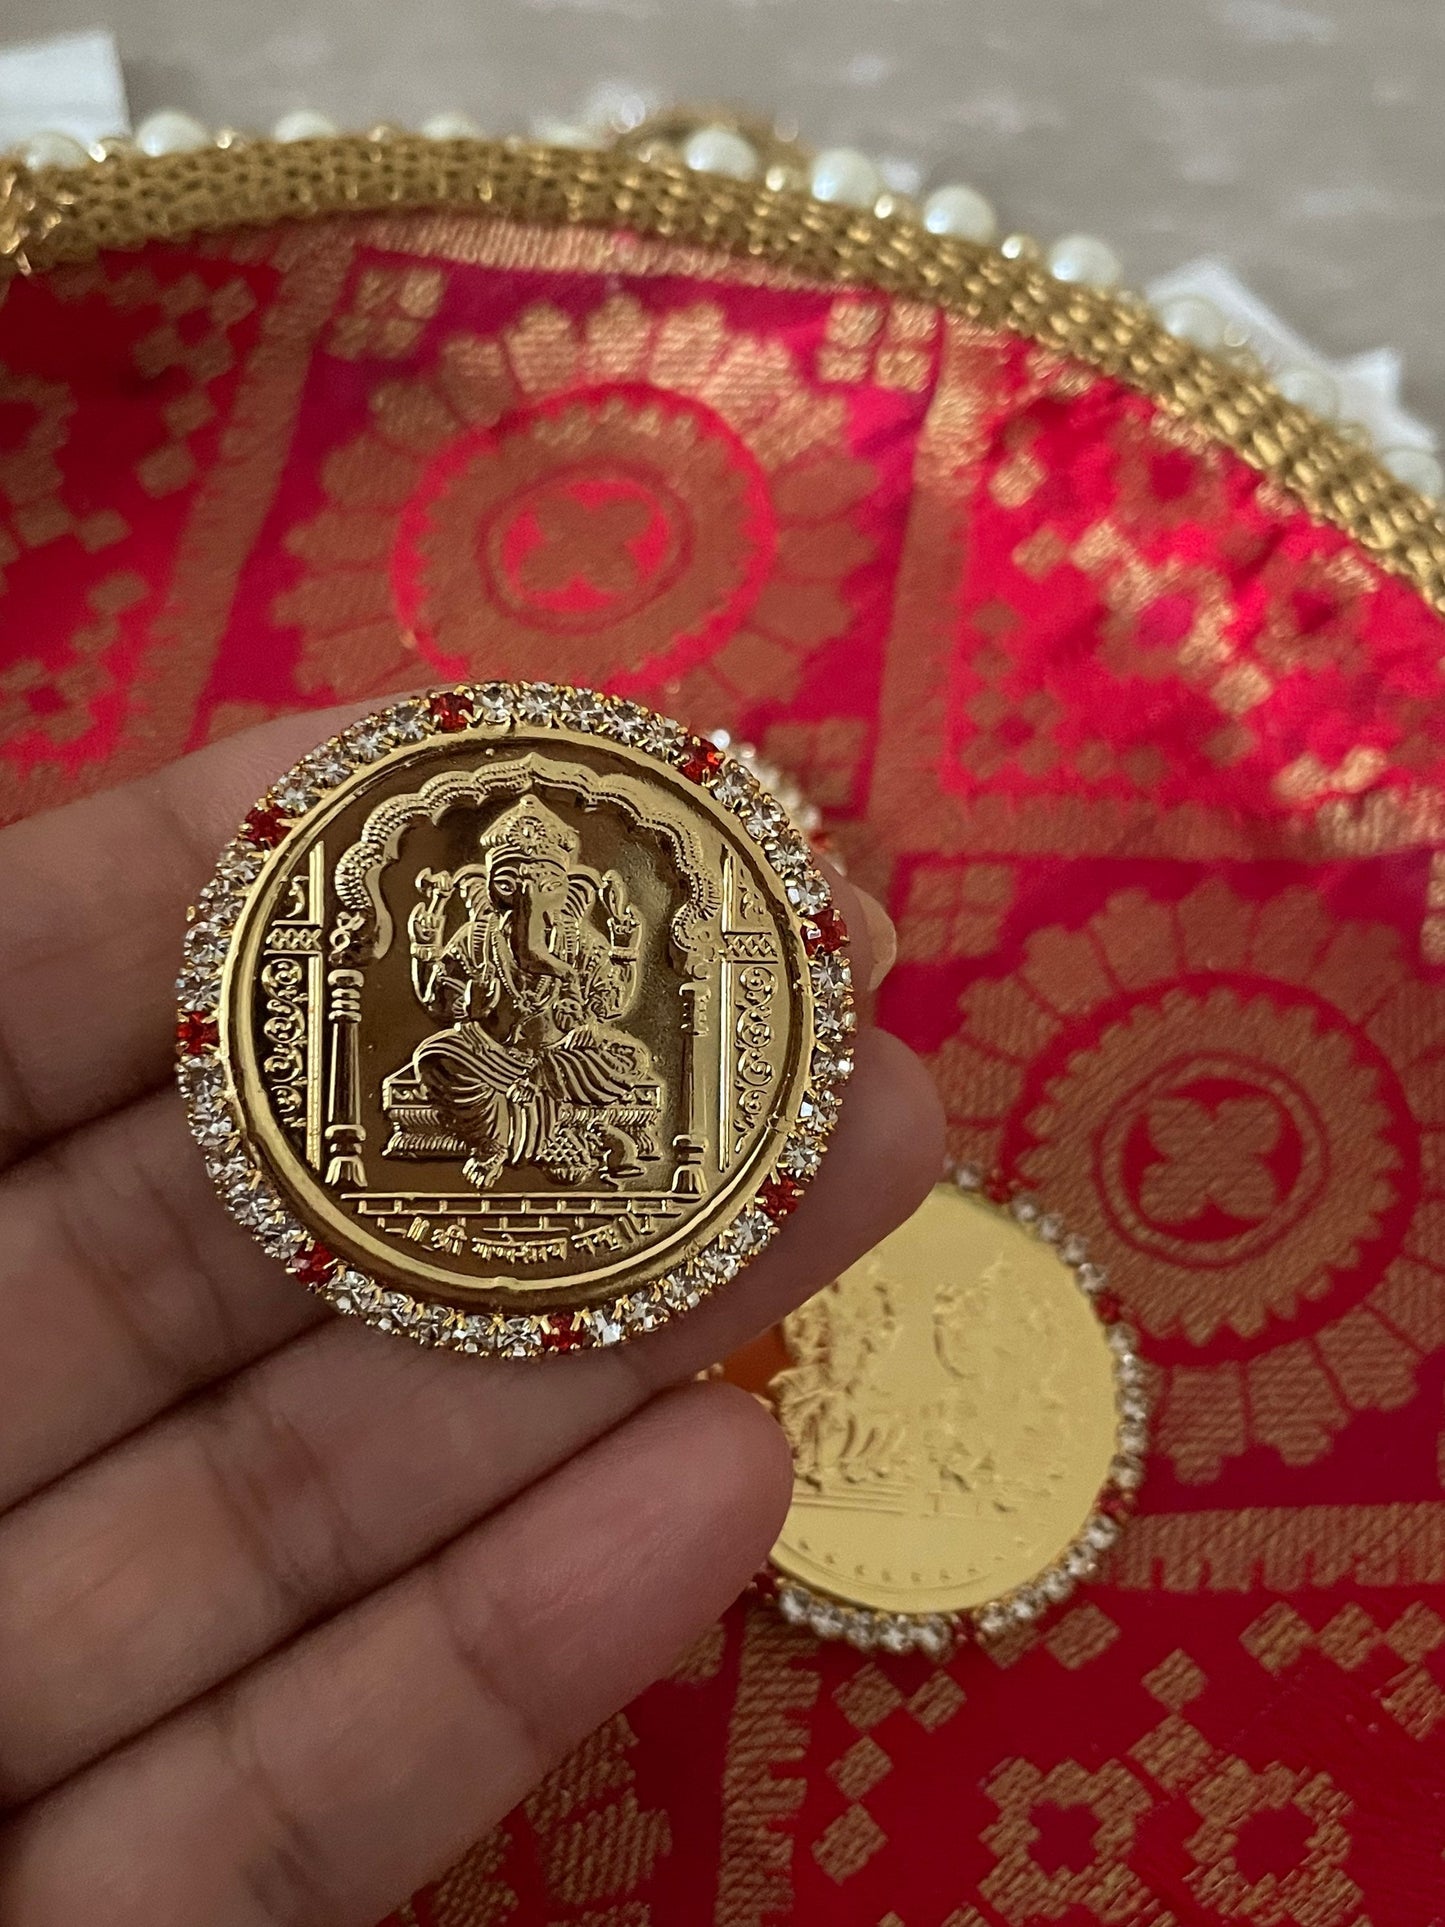 Religious Gifts| New Year Gifts| Lakshmi Ganesh Coin Gift Boxed | Hinduism| Good Luck| Prosperity| New Home| House Warming Return Gifts